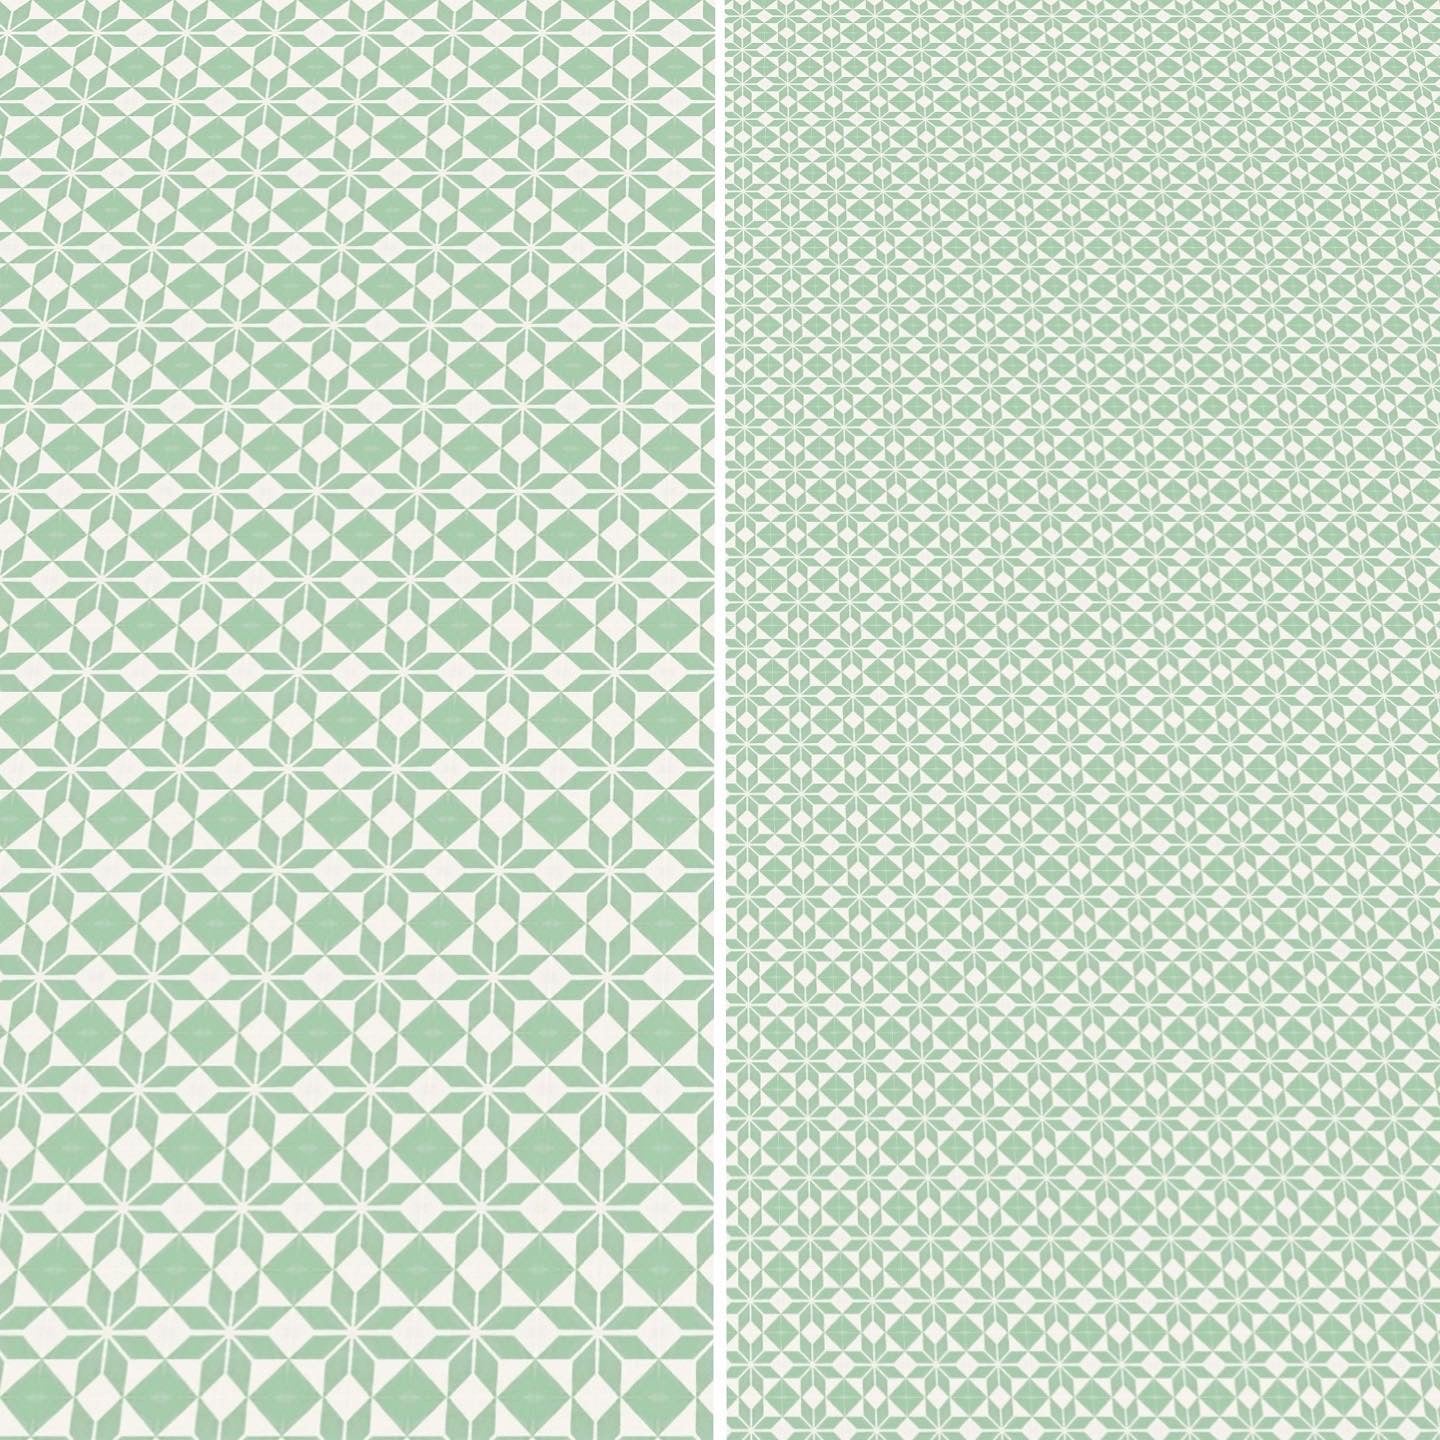 Mint and White Tile